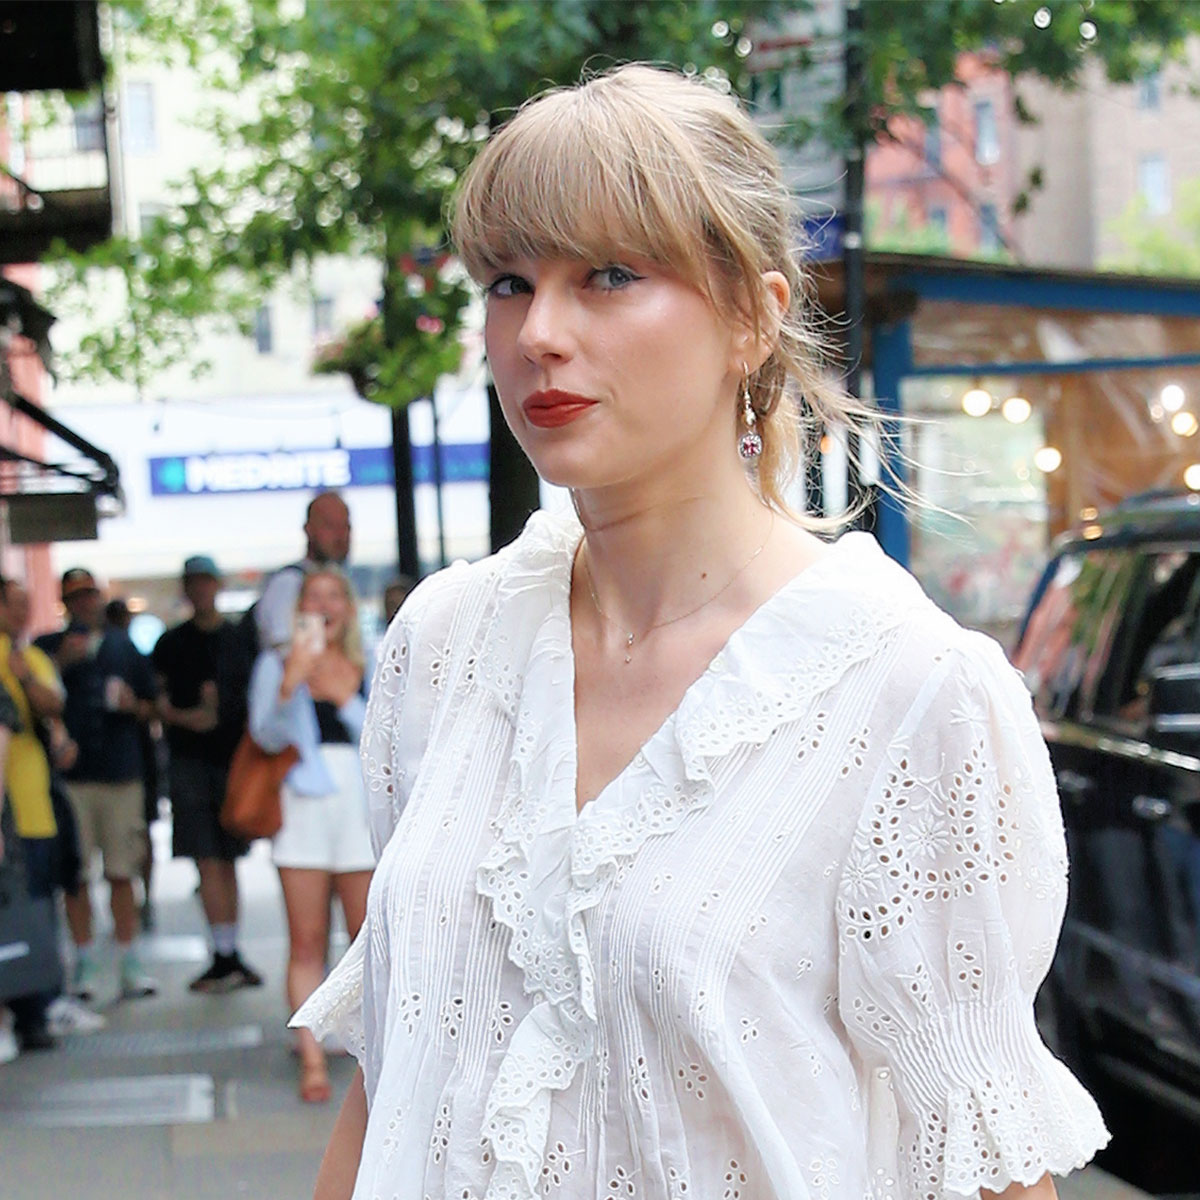 We're Still Not Over The Pleated Mini Skirt Taylor Swift Wore In NYC -  SHEfinds